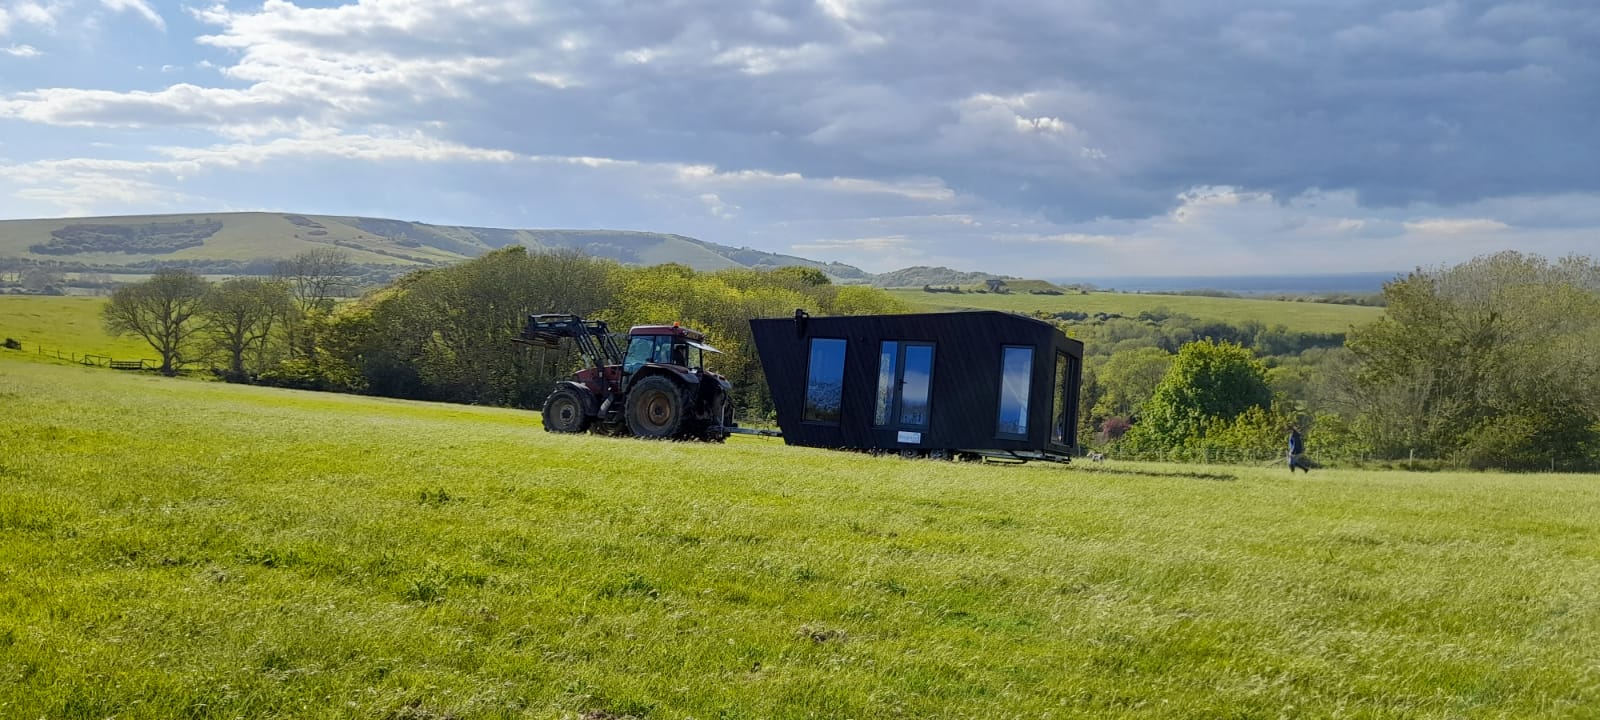 CARRavan - A contemporary cabin on wheels. A bespoke design and build project by Life Space Cabins